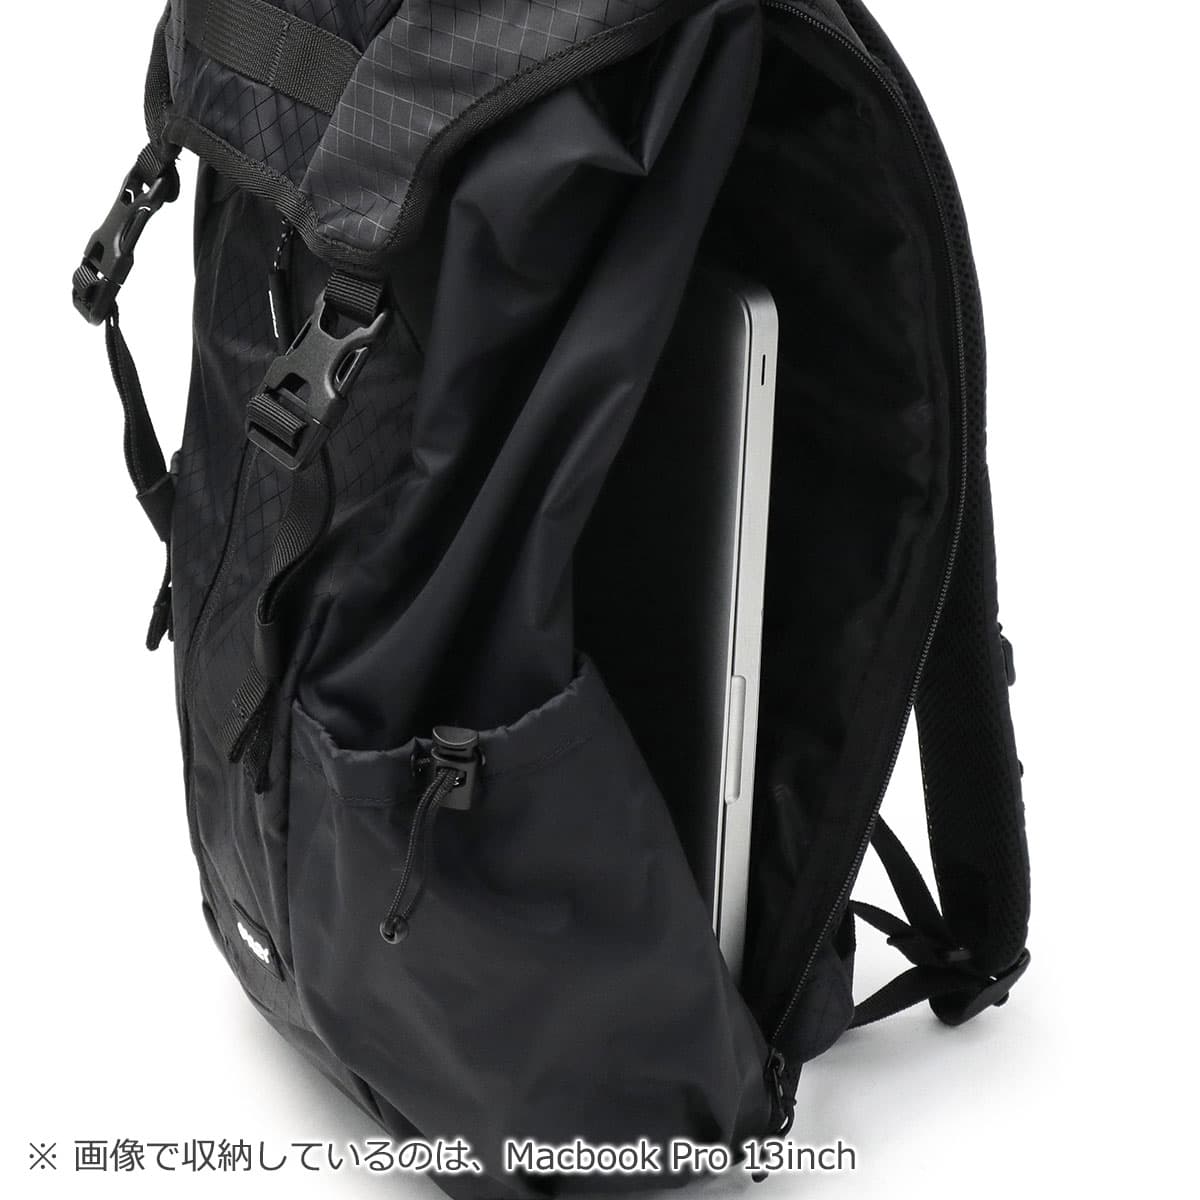 ⭐️ 新品未使用 OAKLEY ⭐️ Voyager Backpack リュック